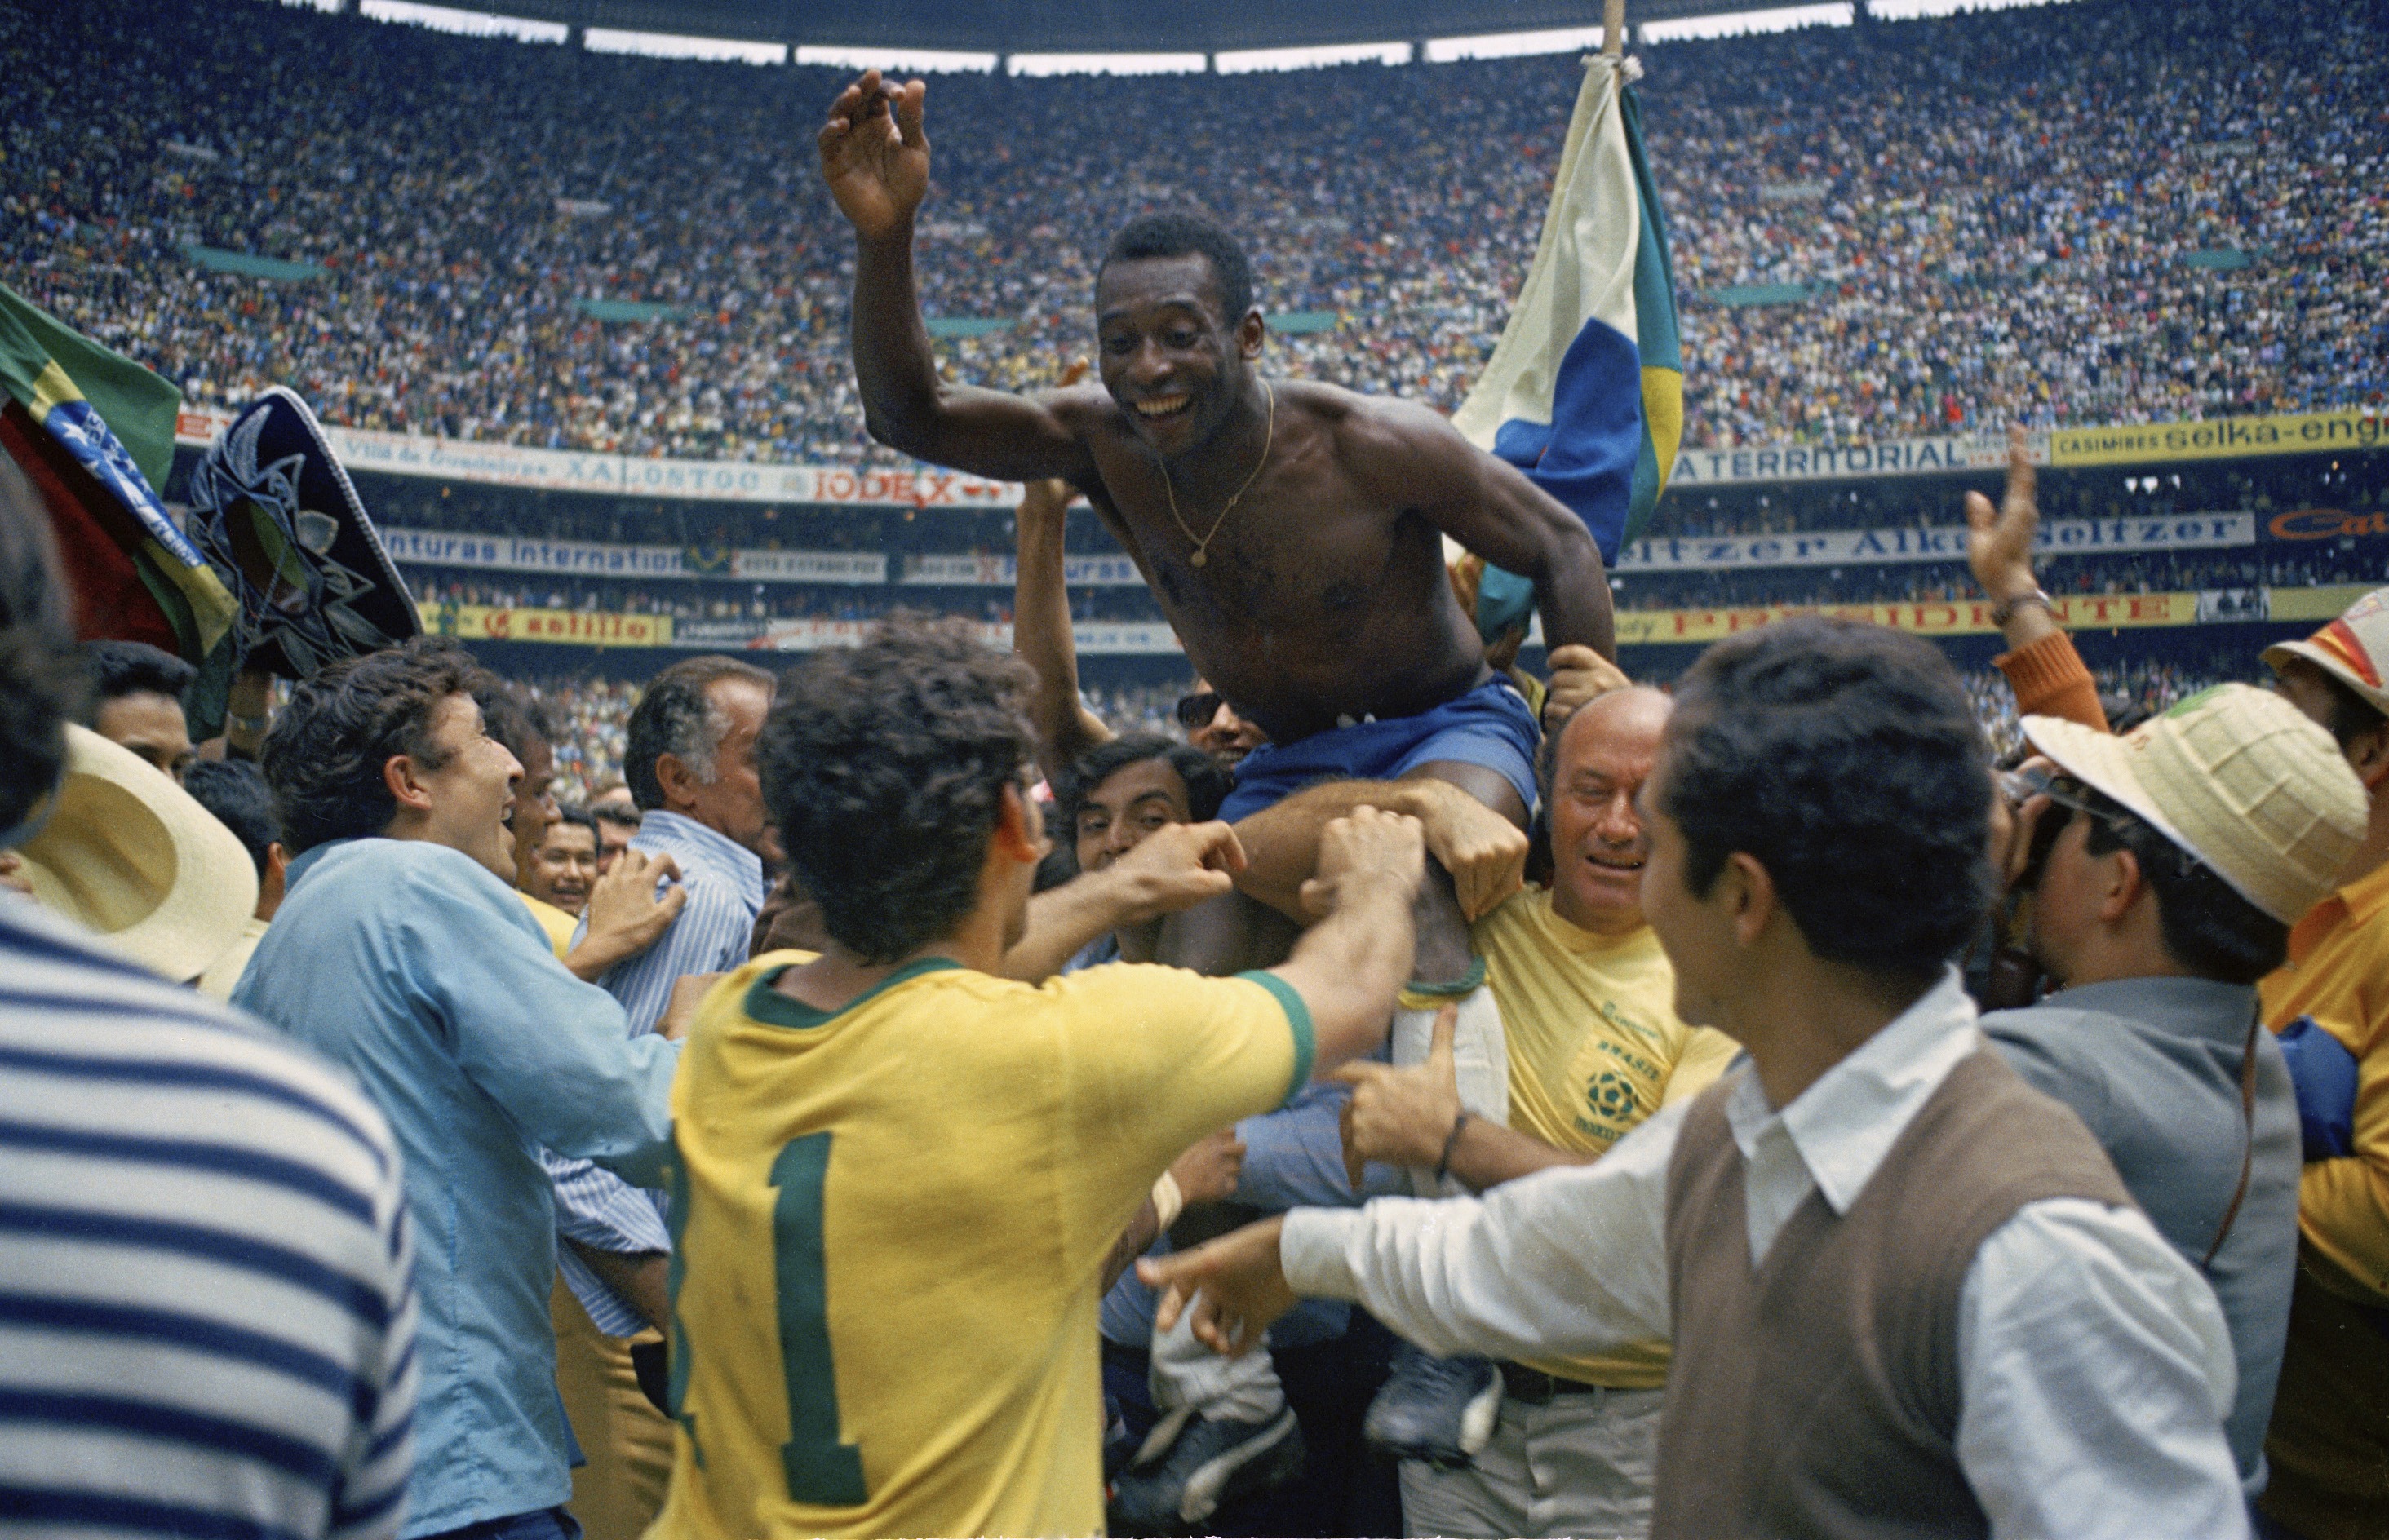 , Pele and Bobby Moore swapping shirts at Mexico 70 is one of game’s most iconic images and great moment of sportsmanship